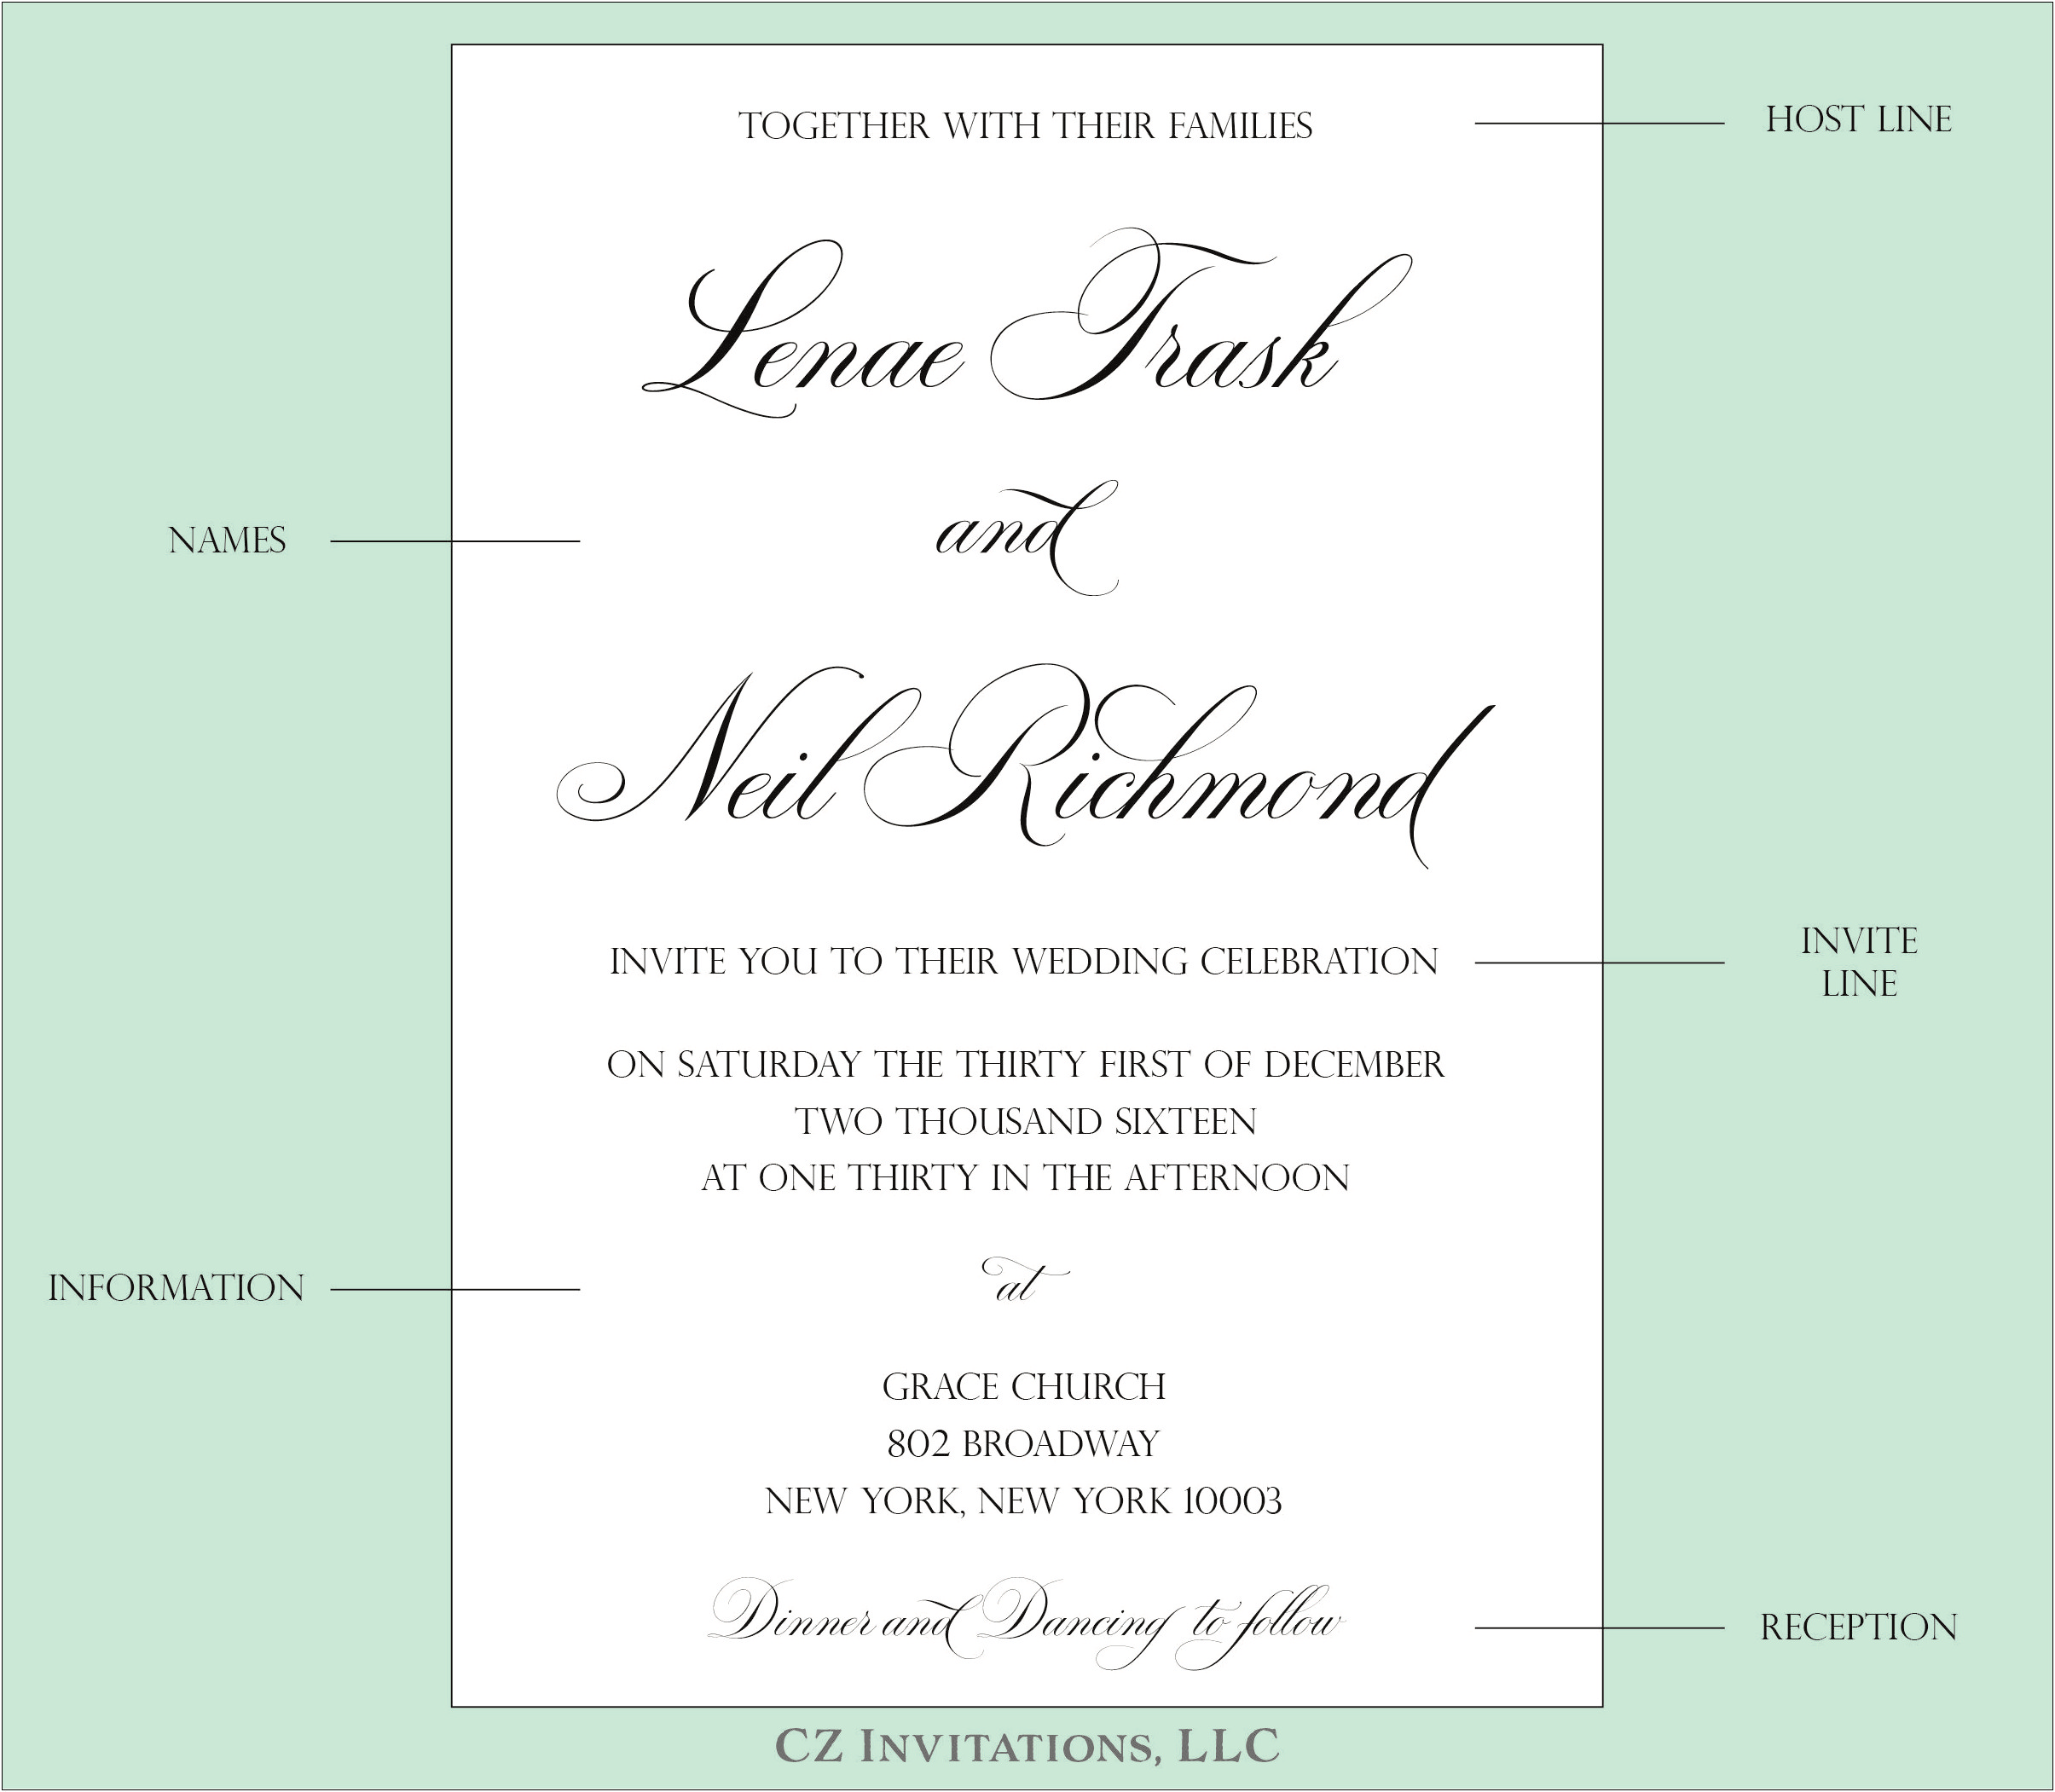 Wording For Wedding Invitations Hosted By Both Parents